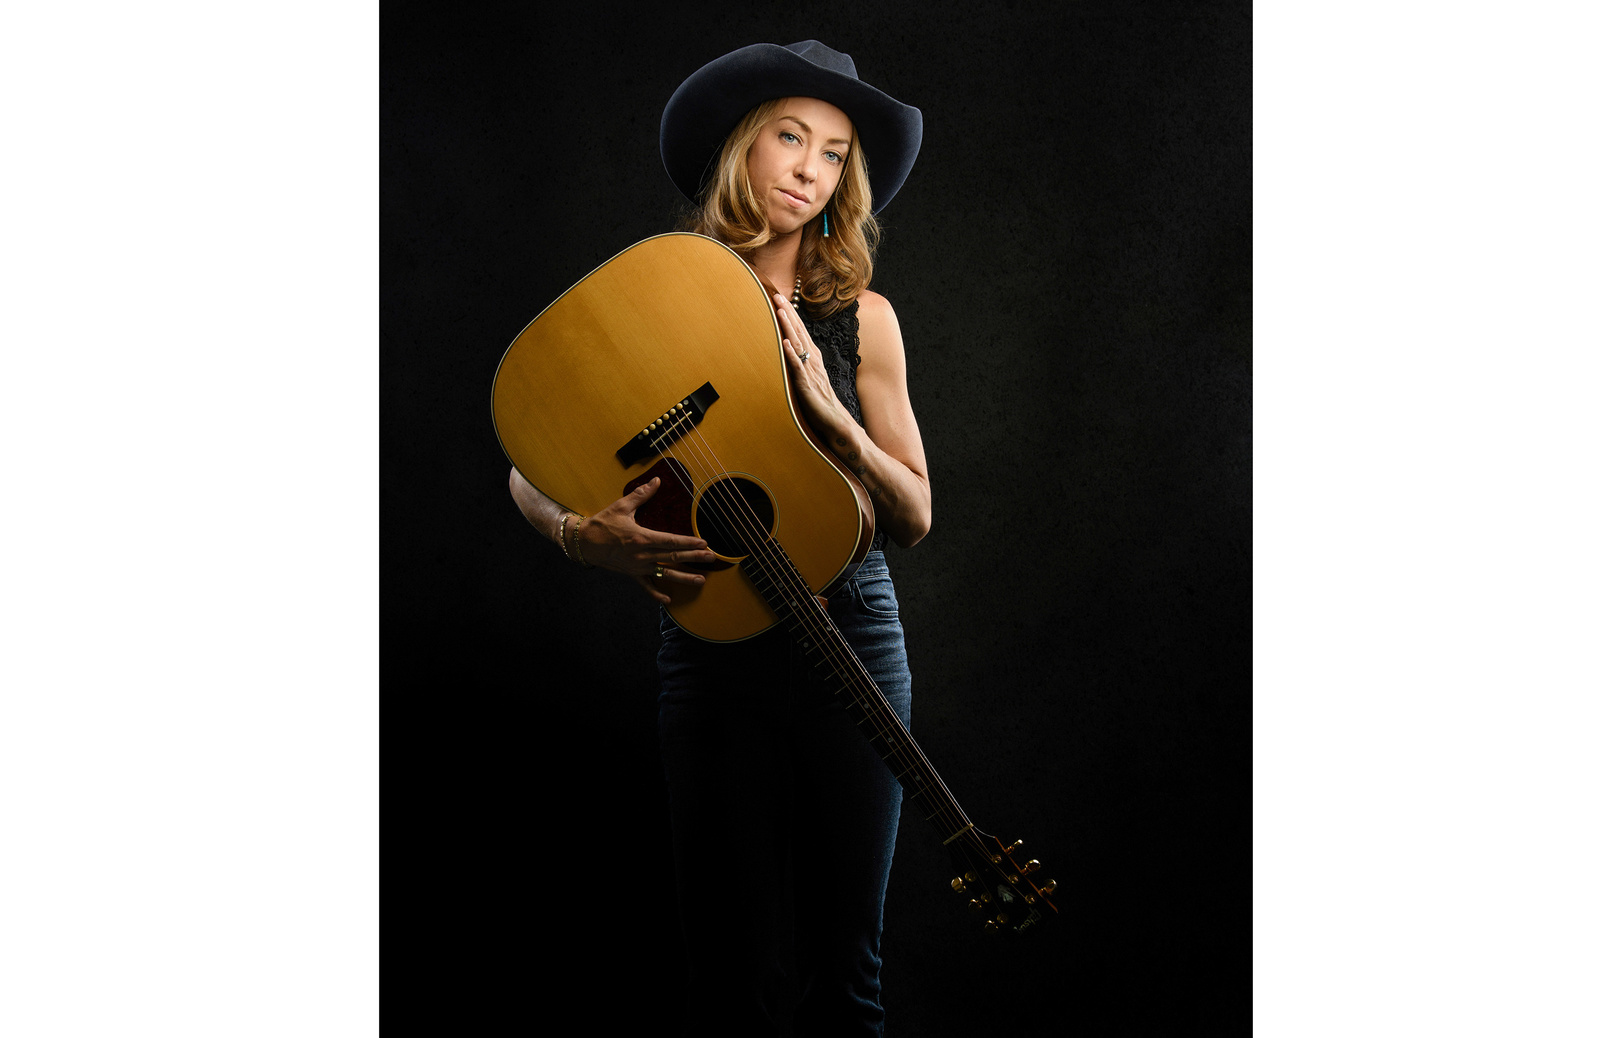 Studio portrait of a beautiful blonde-haired woman wearing a blue cowboy hat and cradling an acoustic guitar.